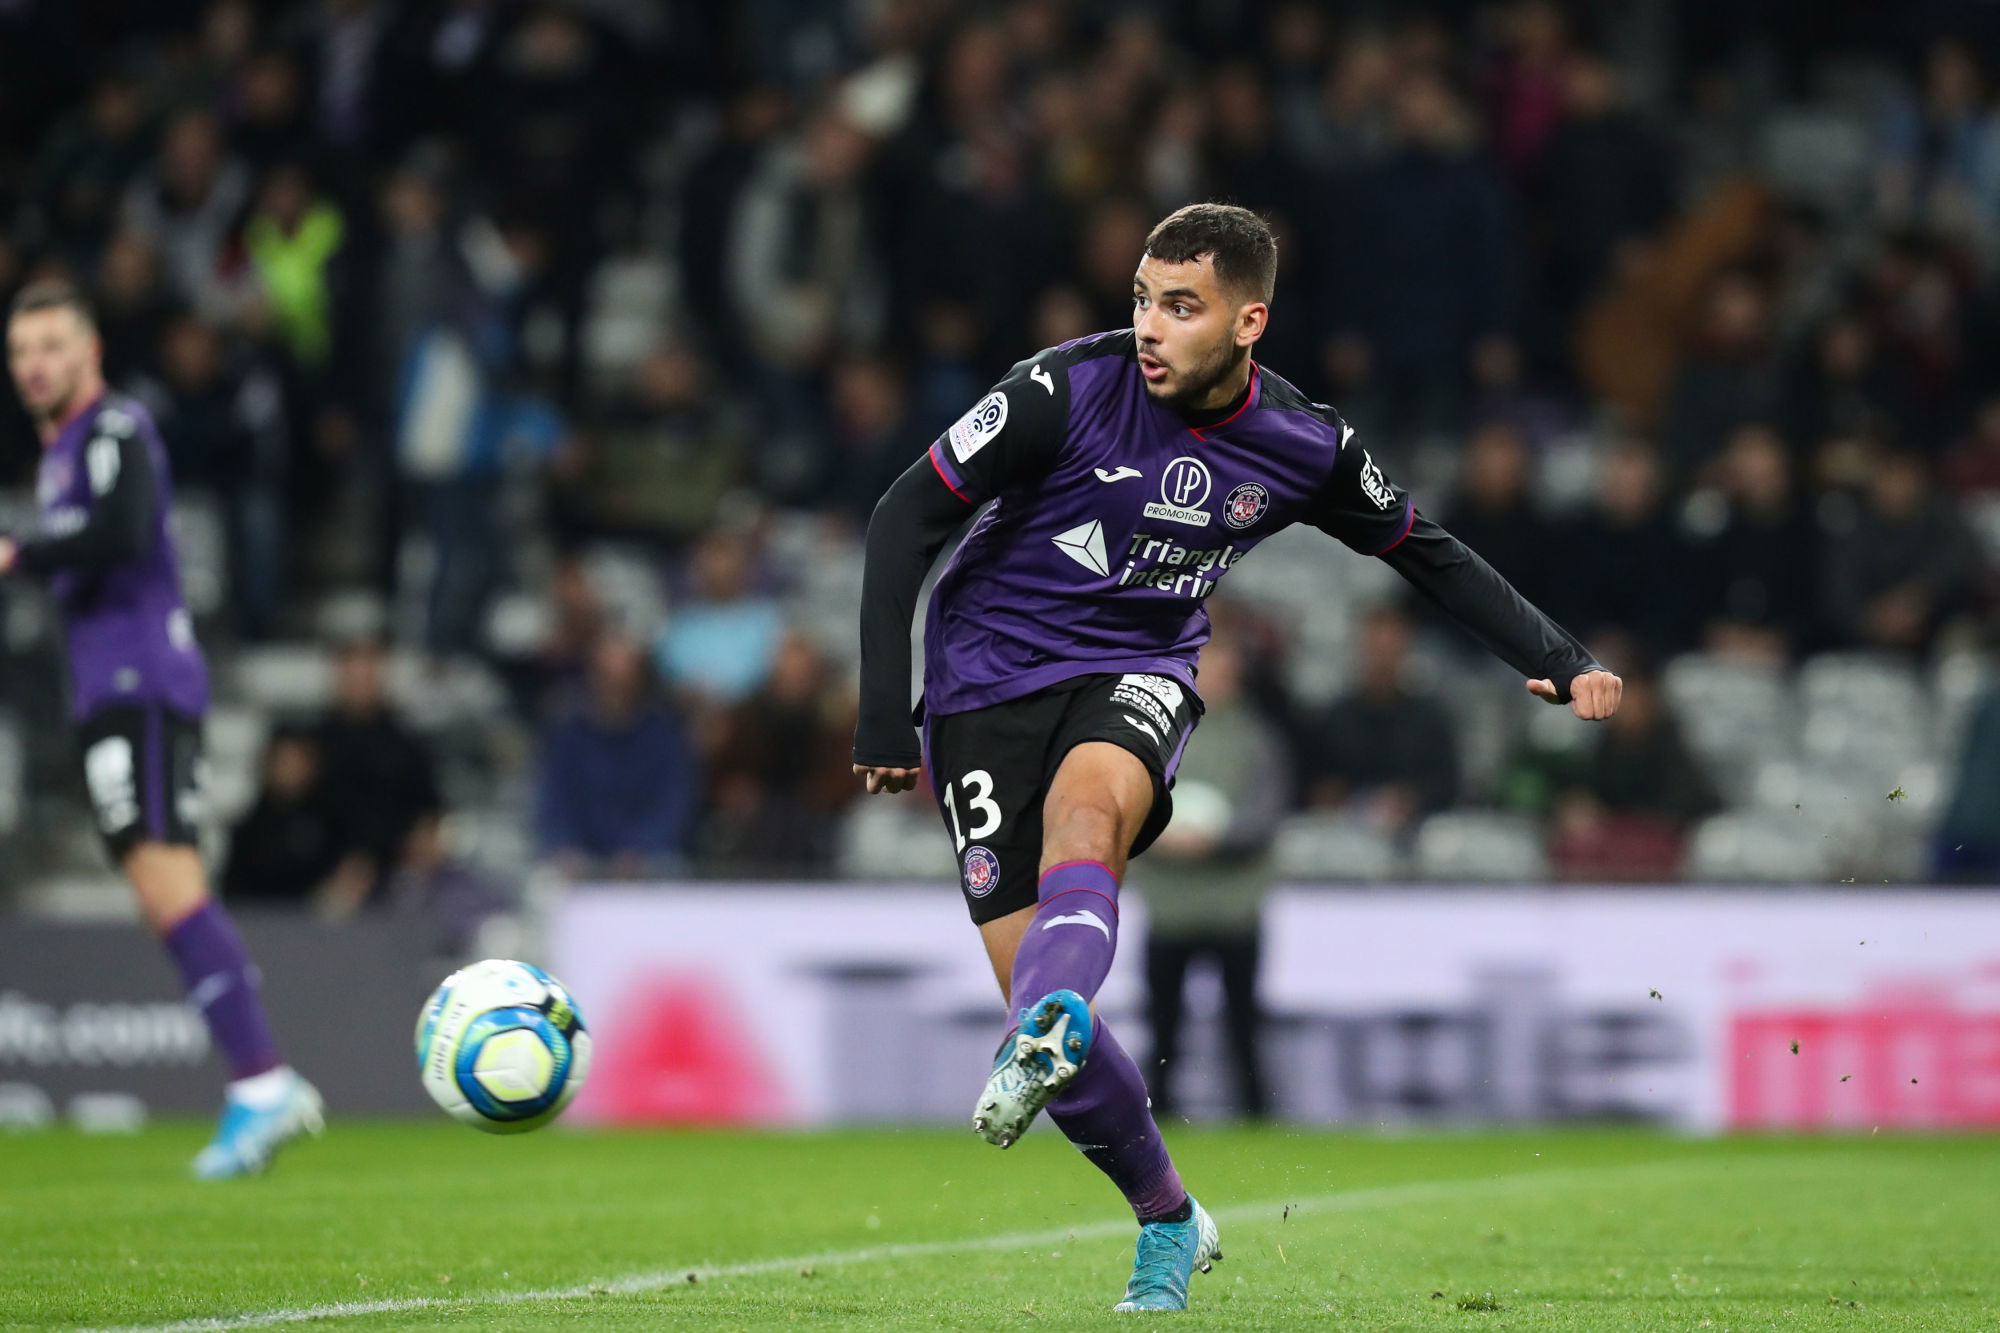 Mathieu GONCALVES of Toulouse during the Ligue 1 match between Toulouse FC and AS Monaco at Stadium Municipal on December 4, 2019 in Toulouse, France. (Photo by Manuel Blondeau/Icon Sport) - Mathieu GONCALVES - Stadium Municipal - Toulouse (France)